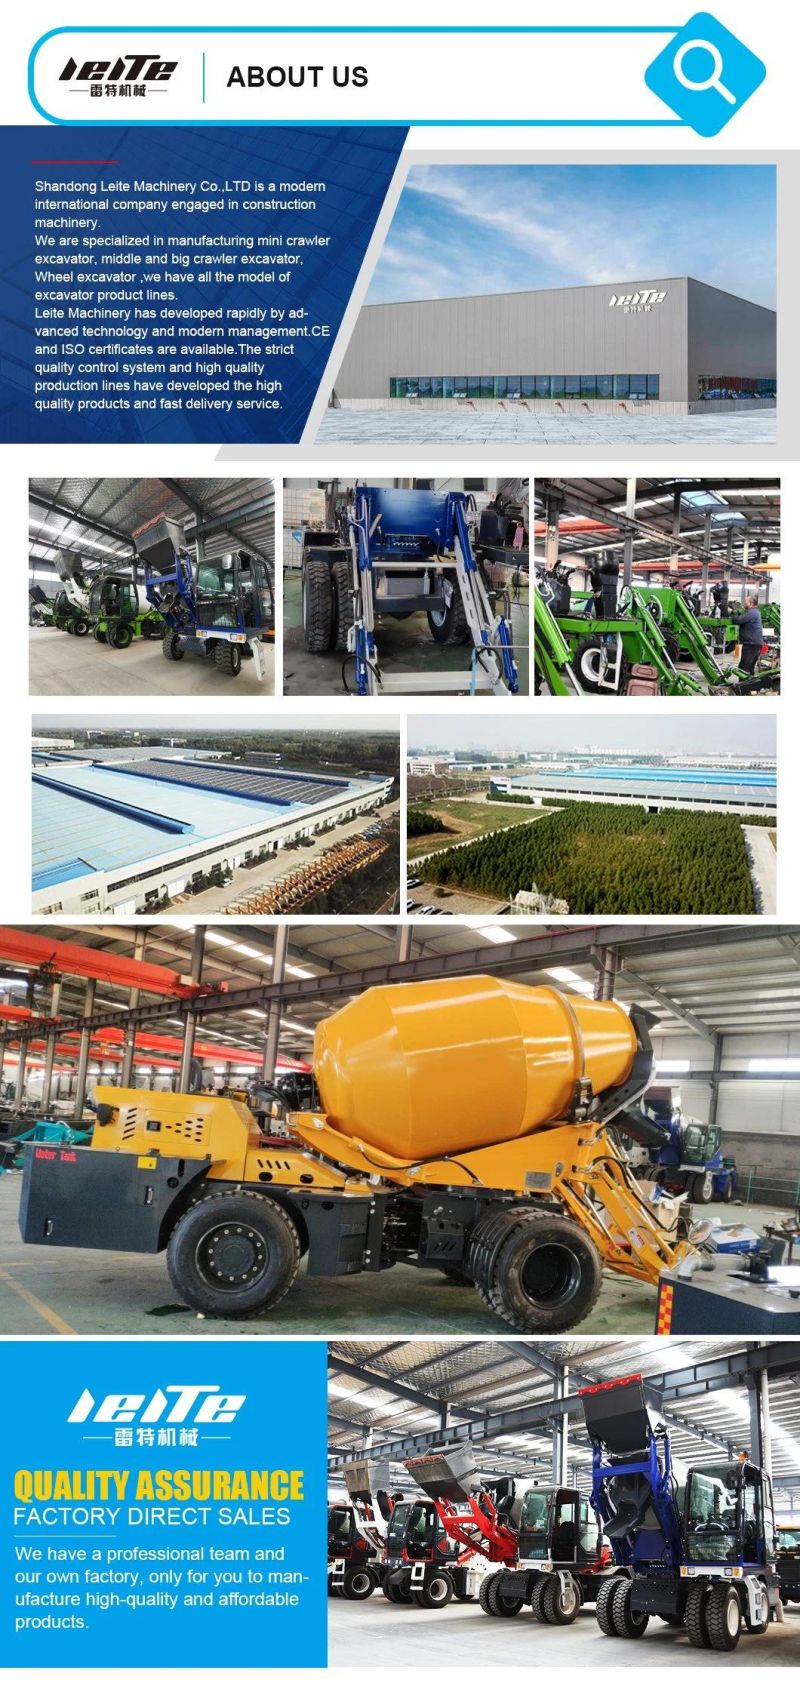 1.5 Cubic Meter Self Loading Ready Mix Truck Concrete Mixer Automatic Loading Transit Mixer Cement Mixer Price